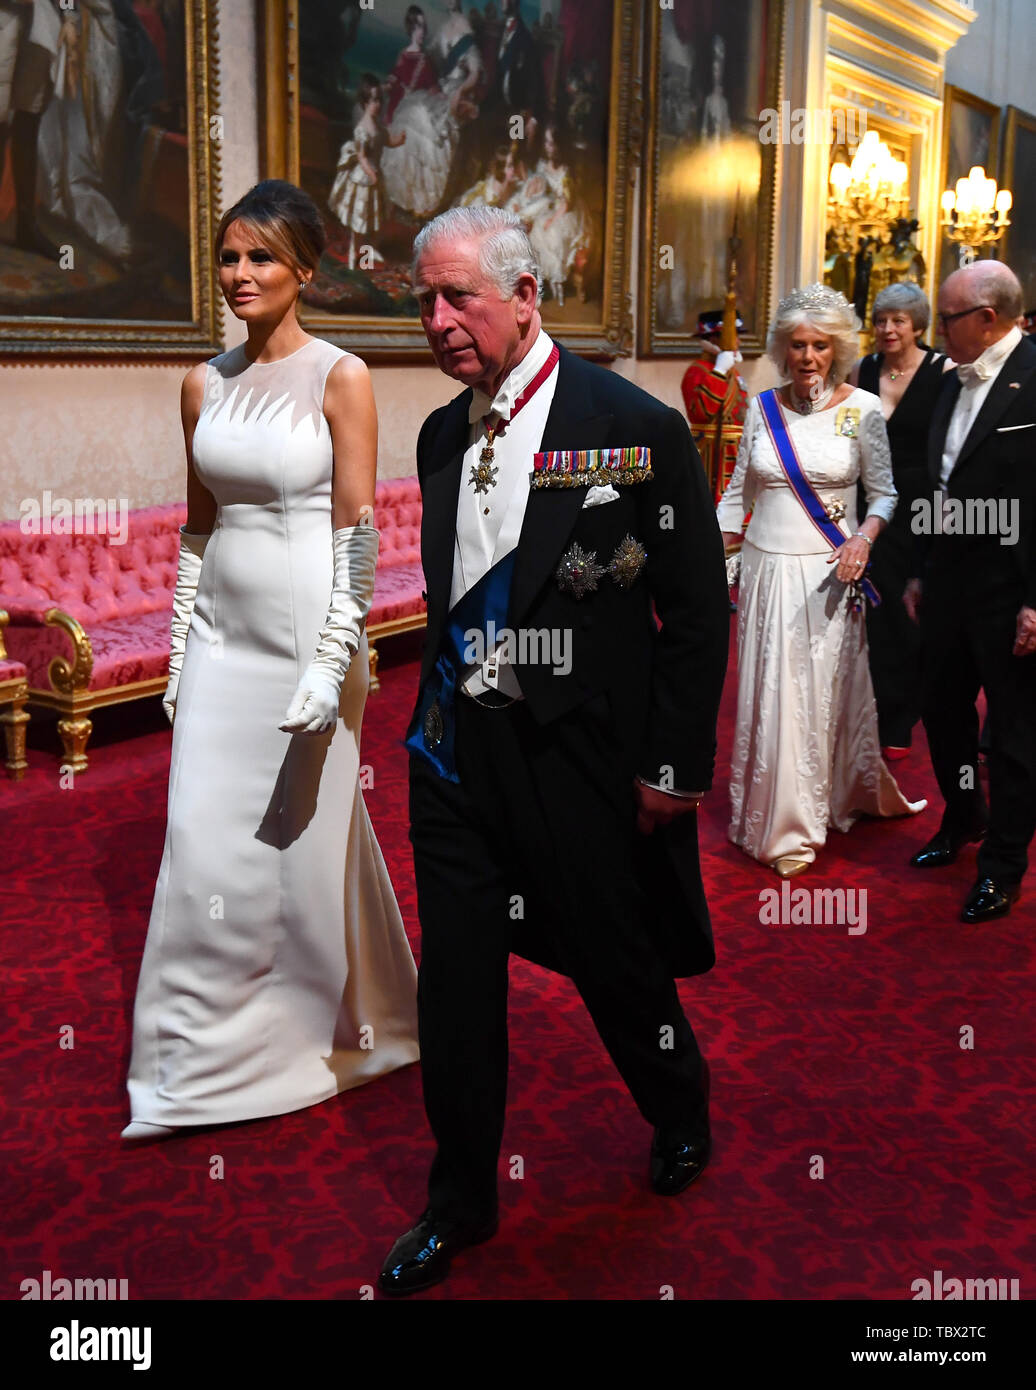 Melania Trump and the Prince of Wales arrive through the East Gallery  during the State Banquet at Buckingham Palace, London, on day one of the US  President's three day state visit to